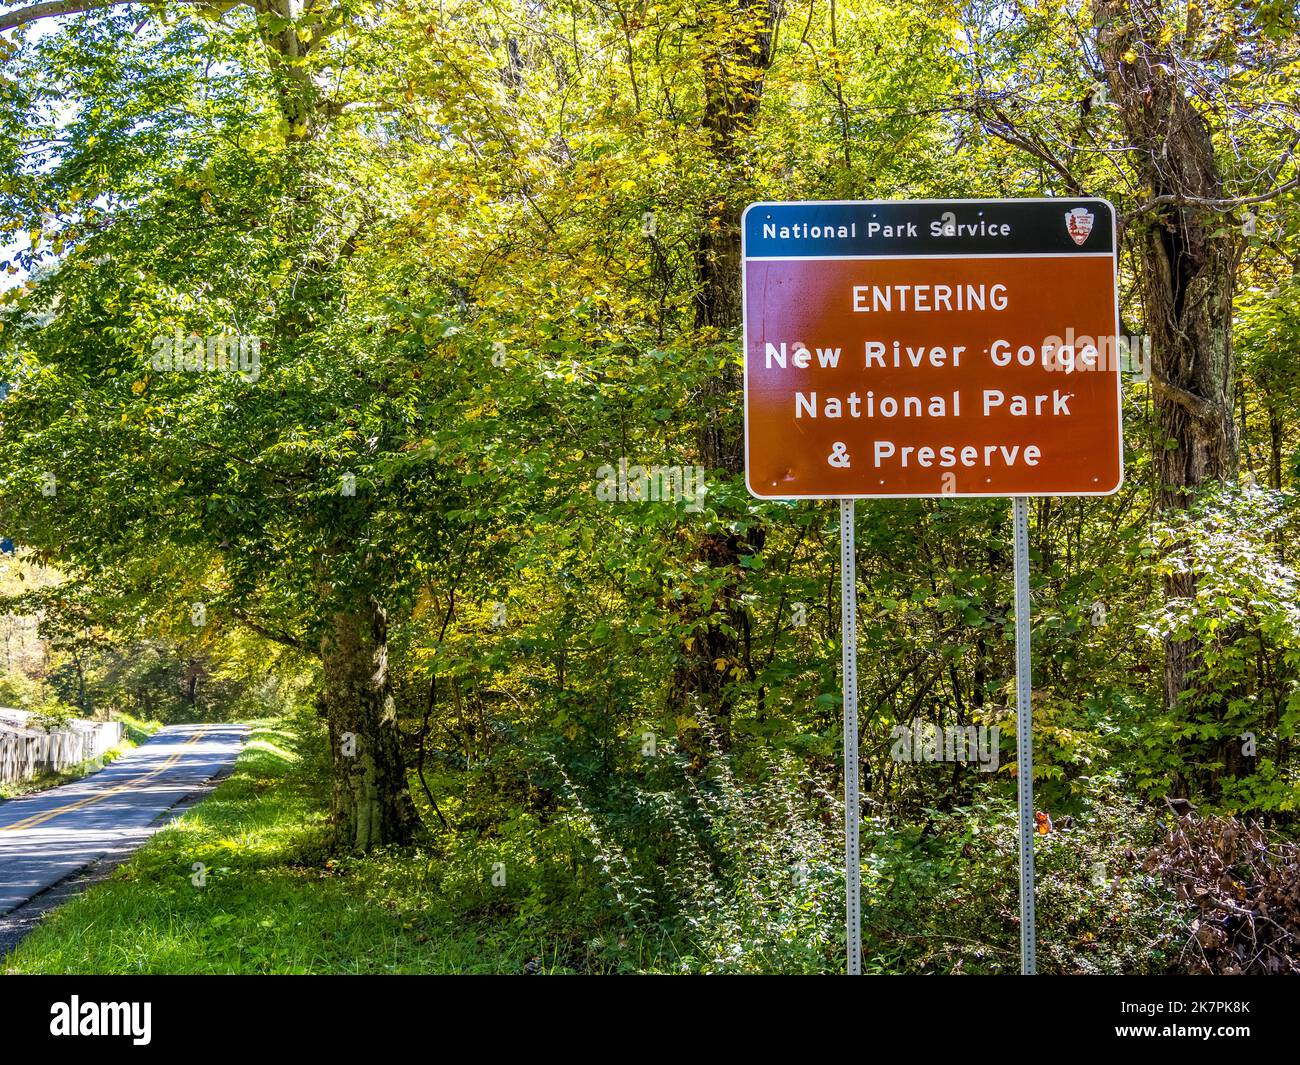 Entrance sign to New River Gorge National Park and Preserve in West Virginia USA Stock Photo